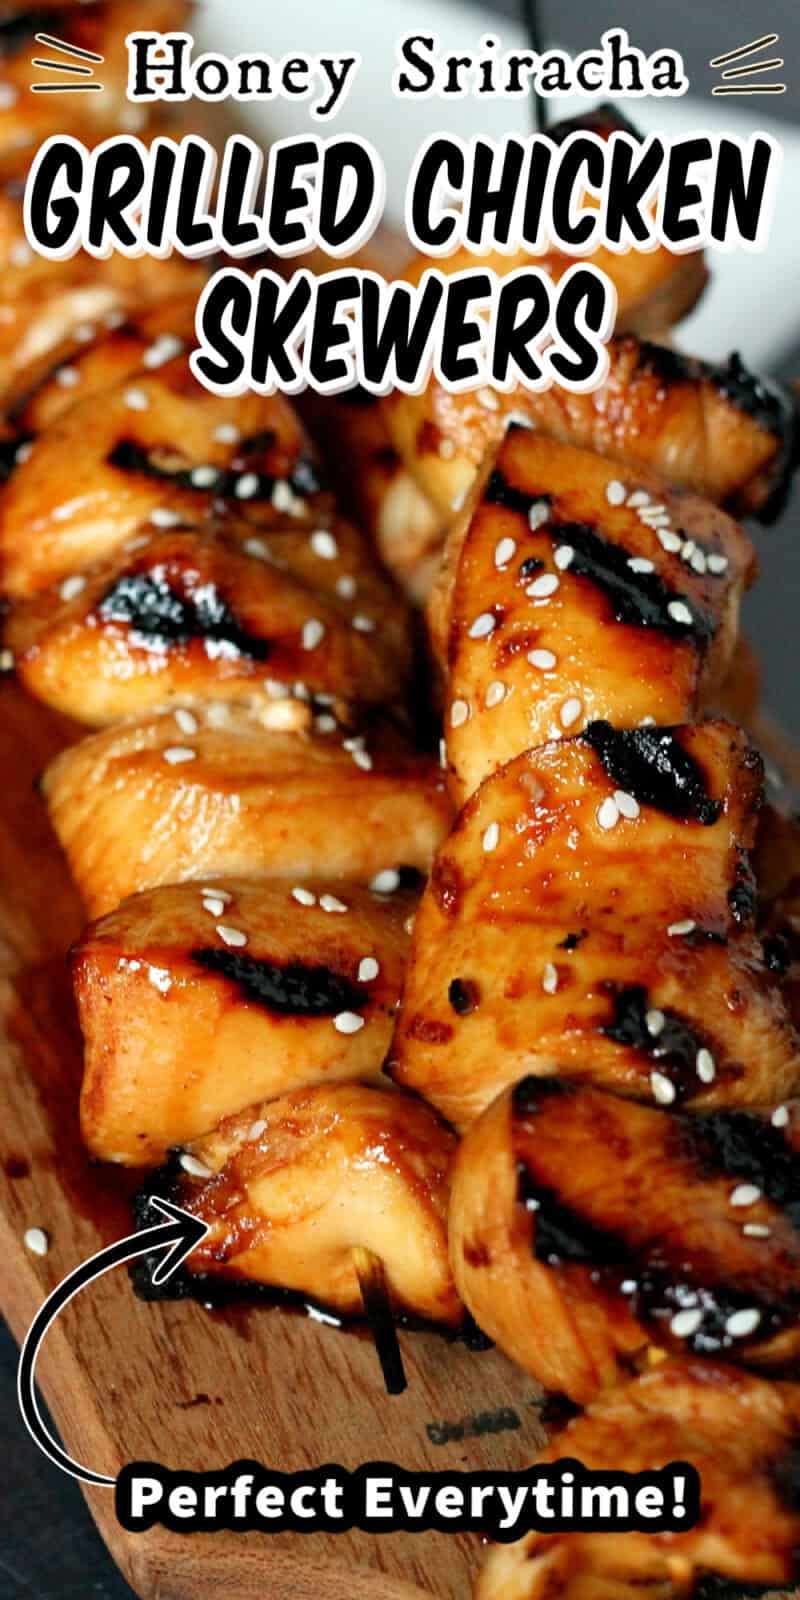 grilled chicken skewers with text